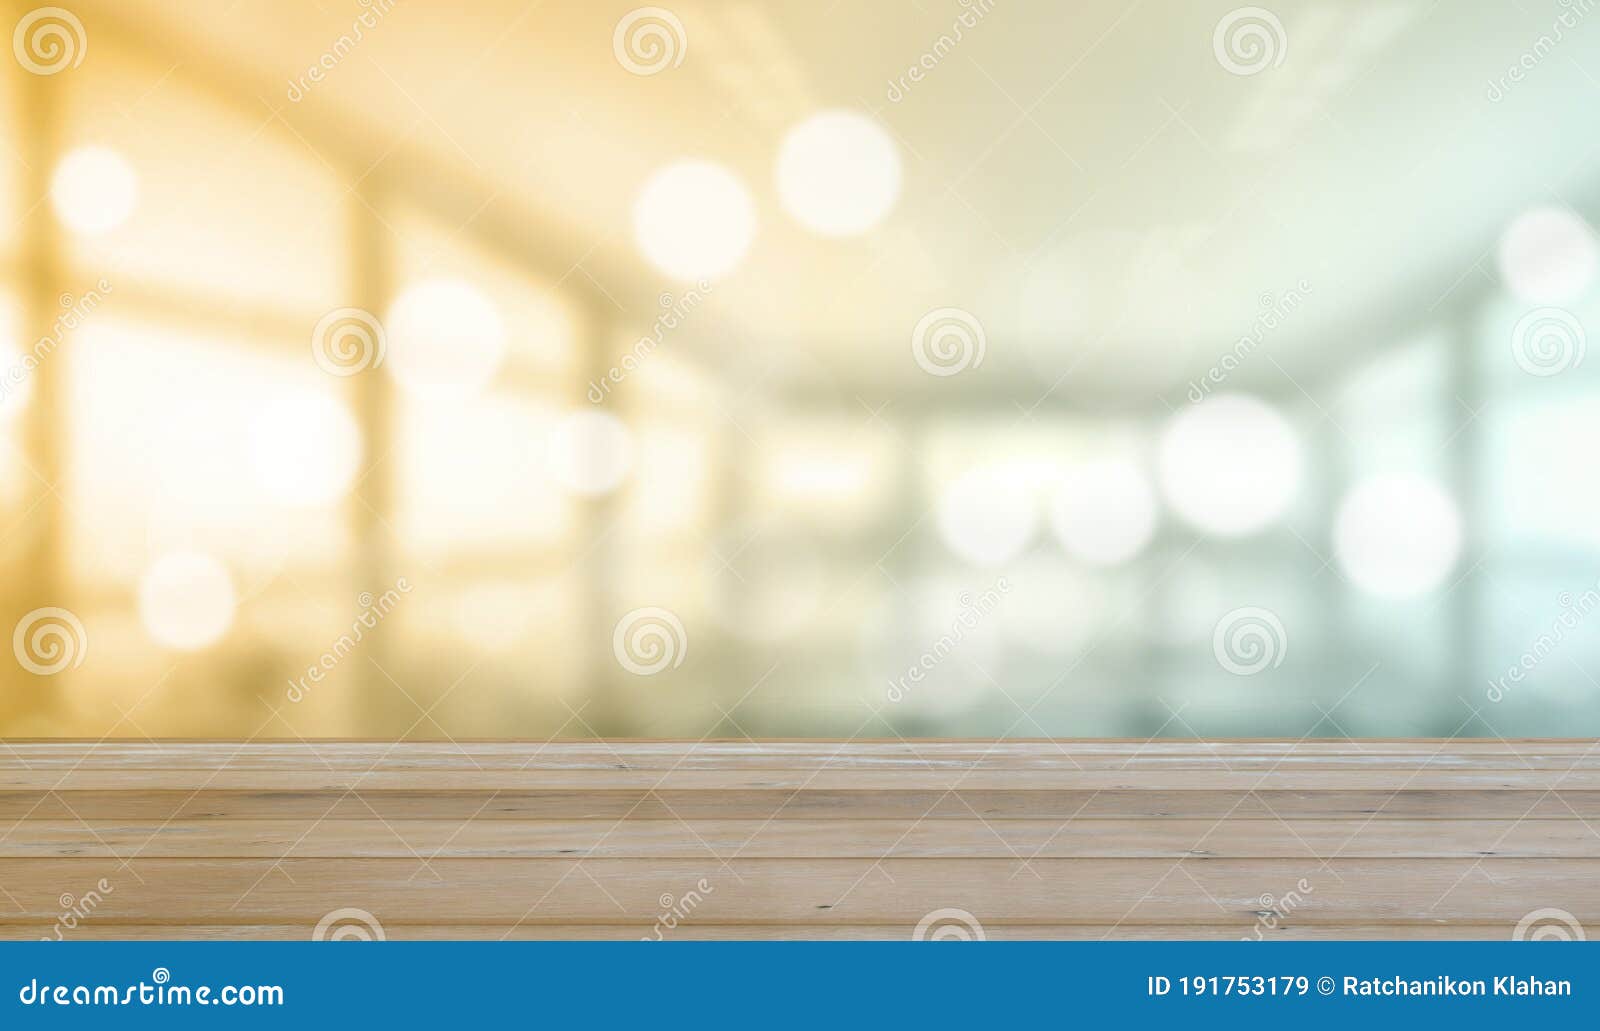 wooden table with blurred of interior office room with city building background